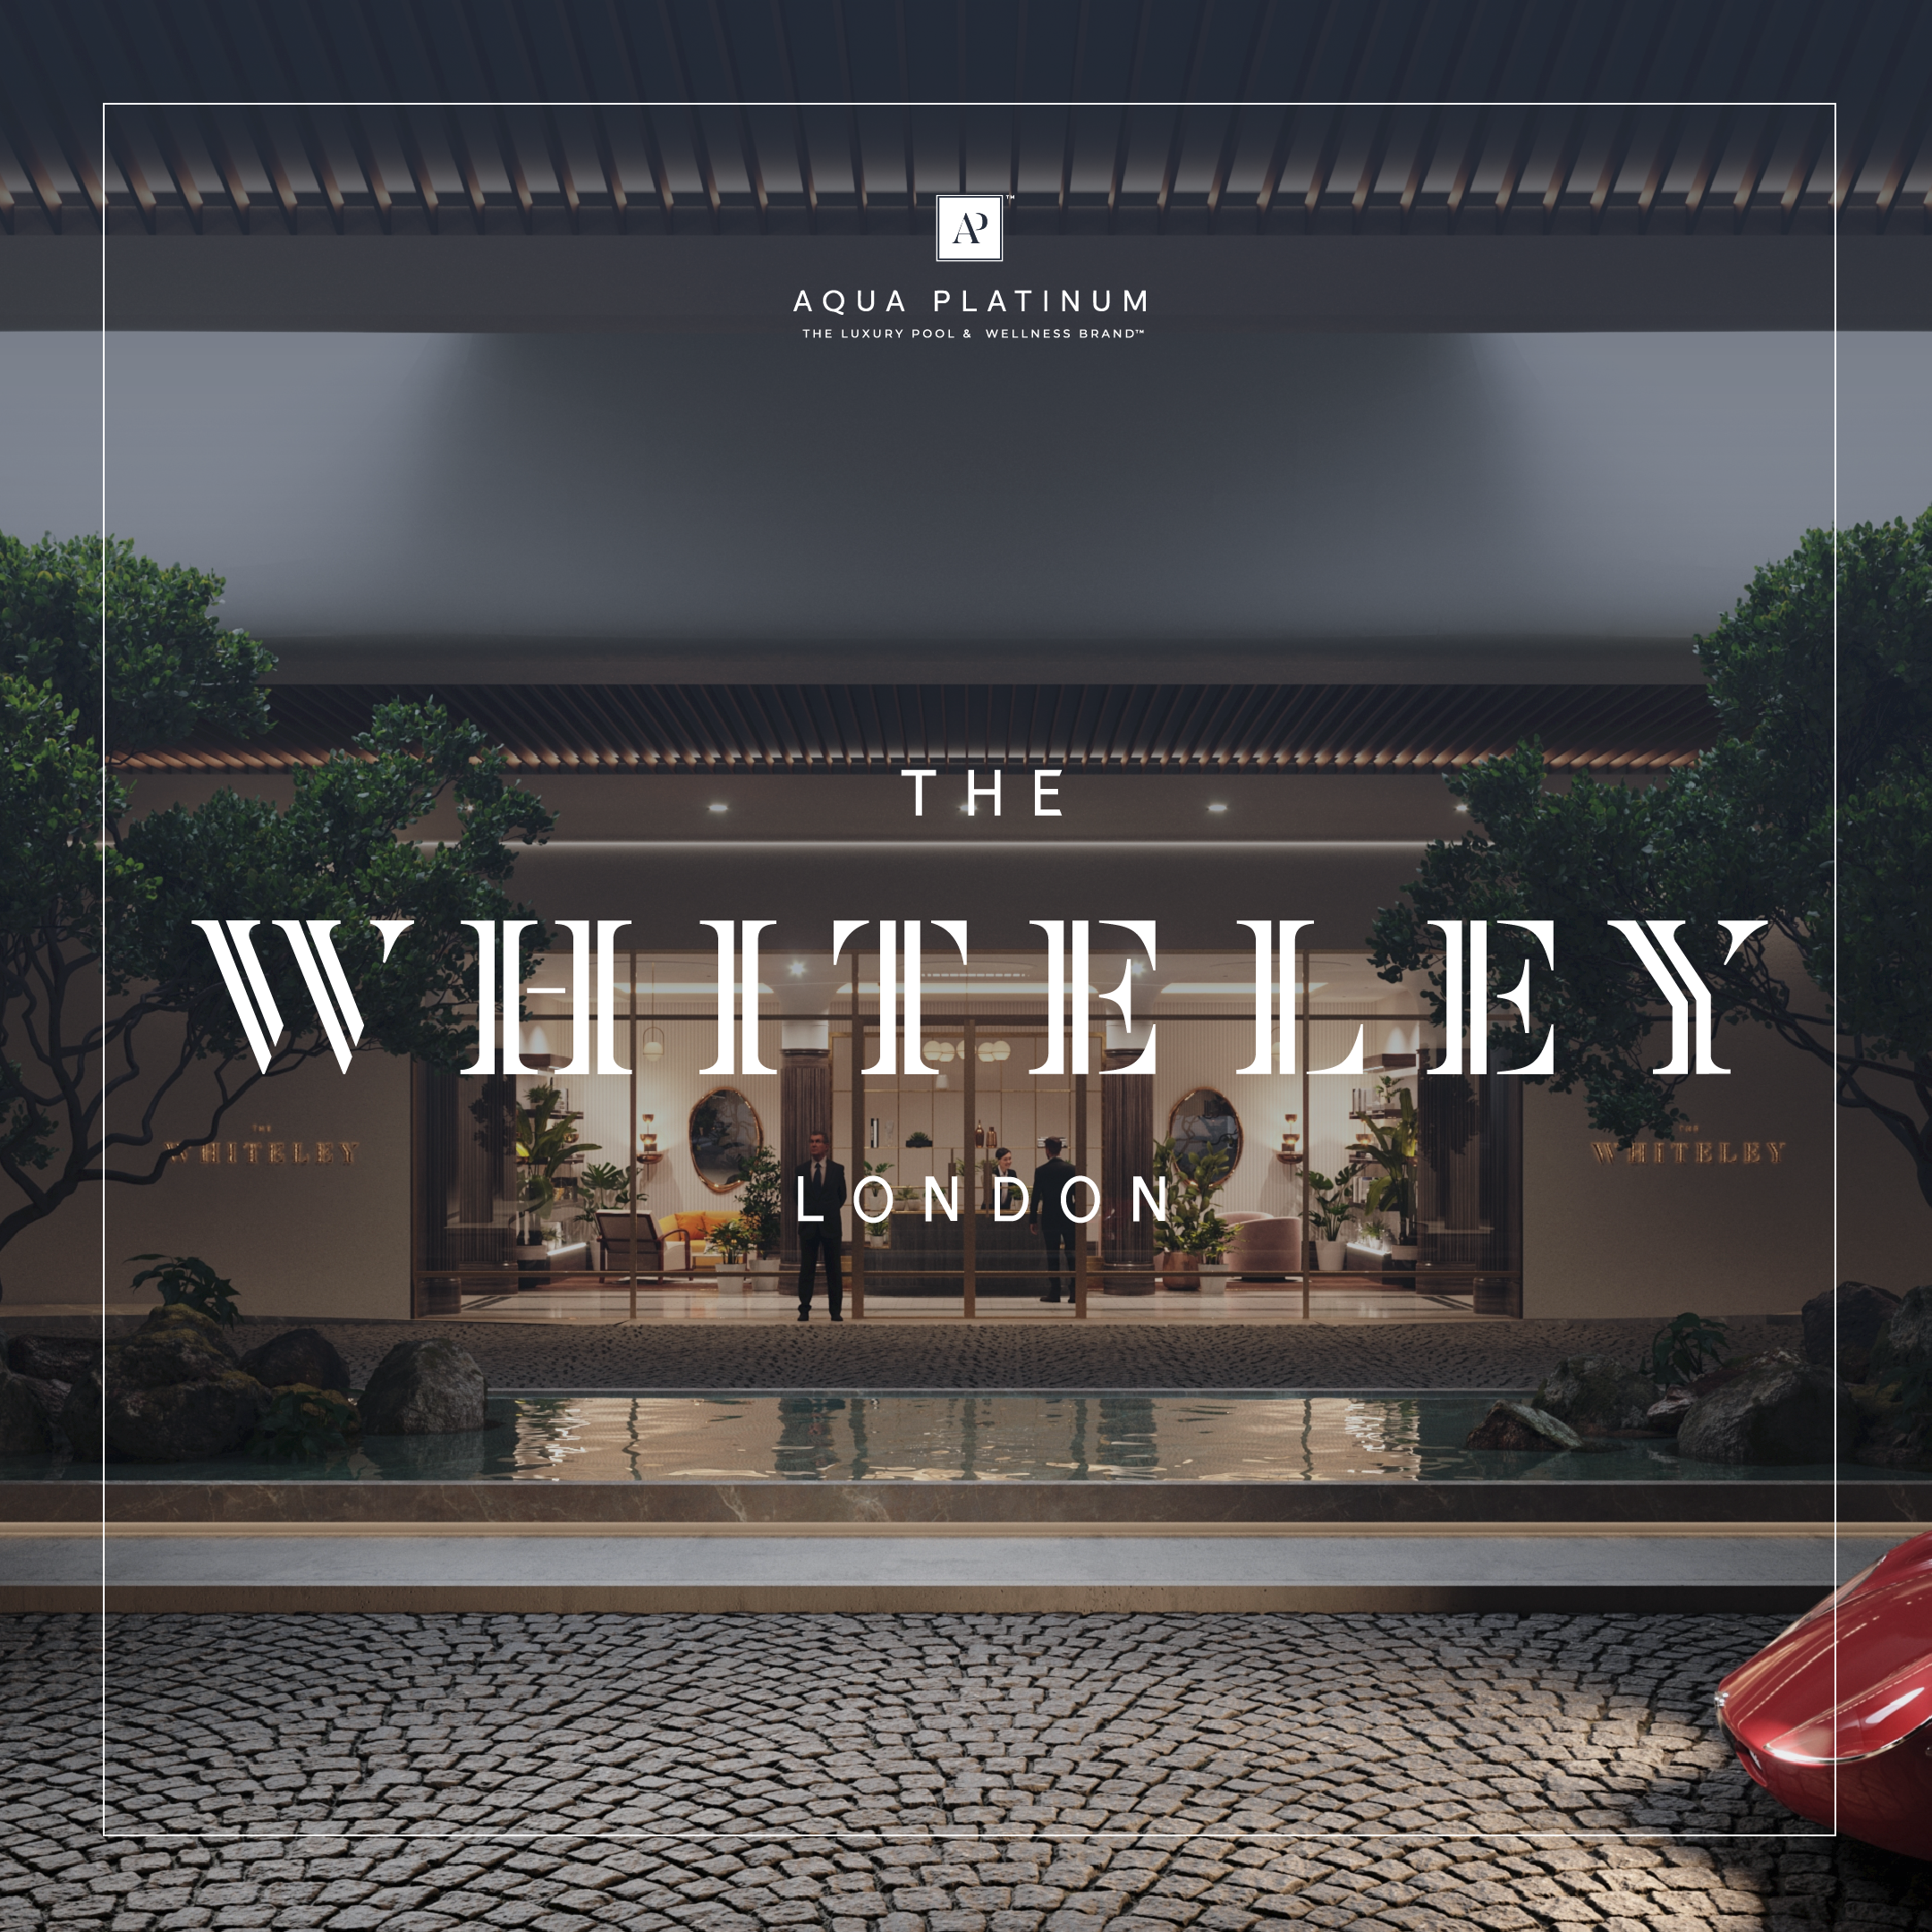 New Collaboration | The Whiteley London